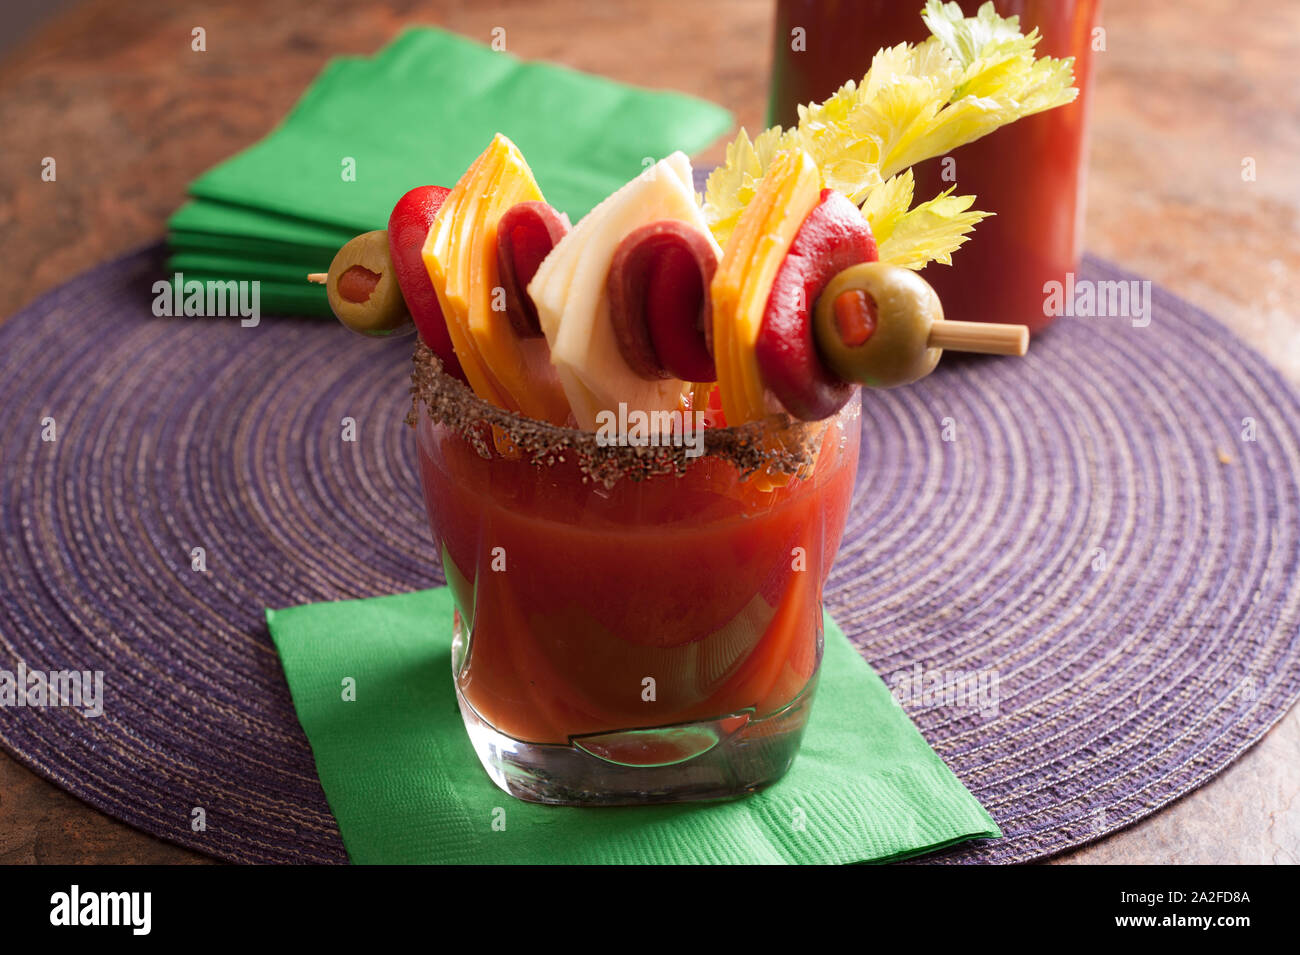 Bloody Mary Foto Stock